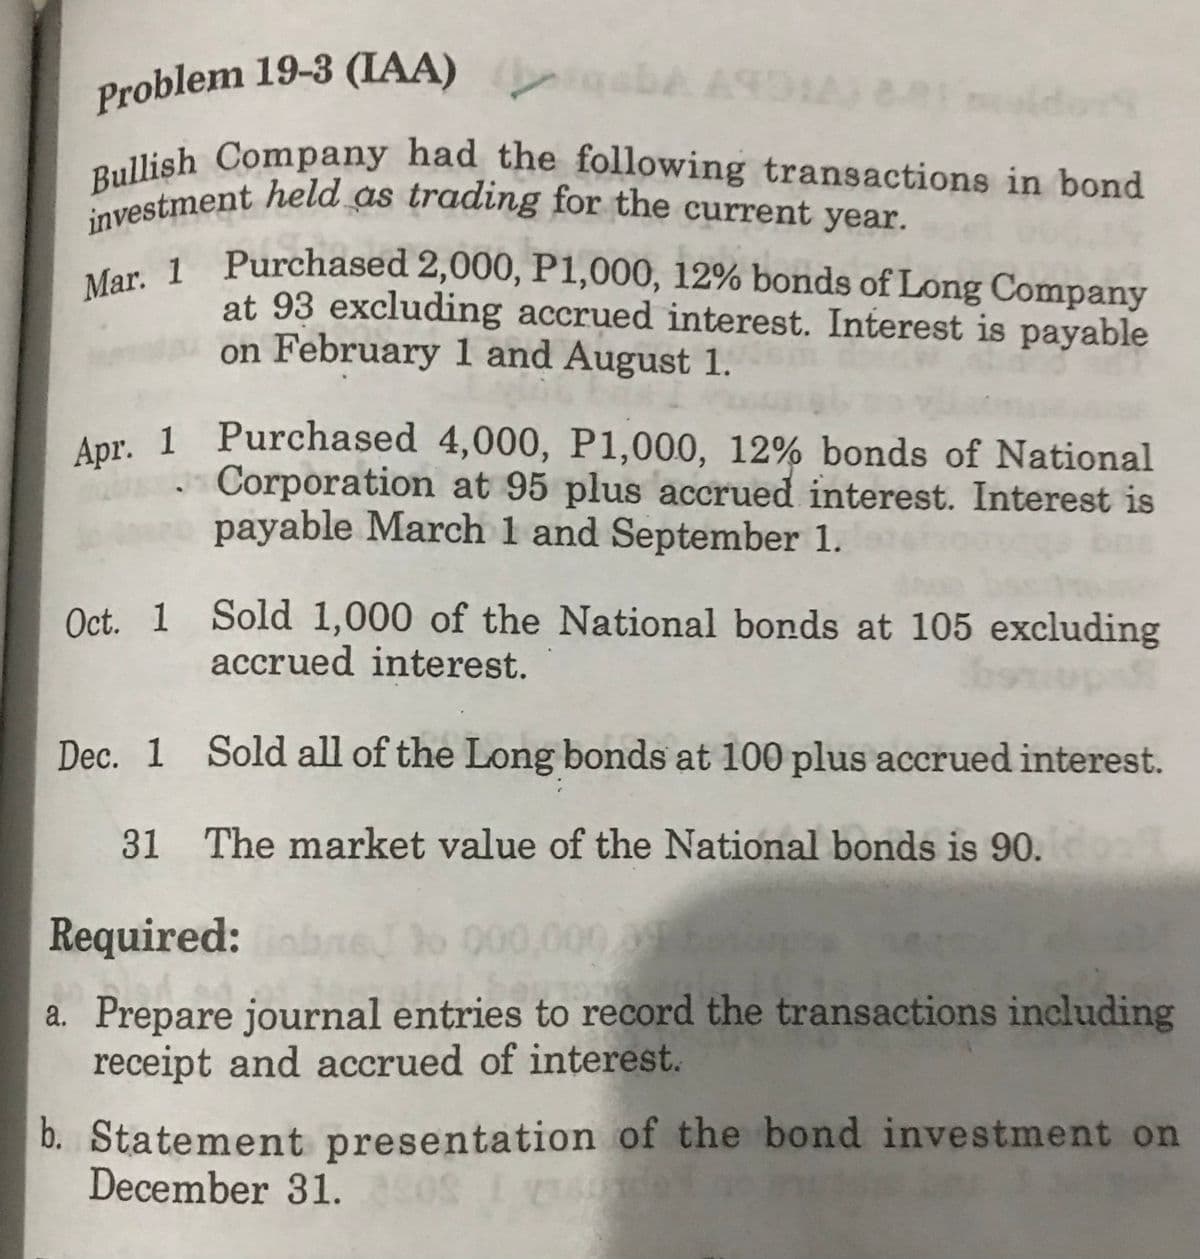 Problem 19-3 (IAA) abA ANDIA
8
Bullish Company had the following transactions in bond
investment held as trading for the current year.
Mar. 1 Purchased 2,000, P1,000, 12% bonds of Long Company
at 93 excluding accrued interest. Interest is payable
on February 1 and August 1.
Apr. 1 Purchased 4,000, P1,000, 12% bonds of National
Corporation at 95 plus accrued interest. Interest is
payable March 1 and September 1.
Oct. 1 Sold 1,000 of the National bonds at 105 excluding
accrued interest.
Dec. 1 Sold all of the Long bonds at 100 plus accrued interest.
31 The market value of the National bonds is 90.
Required: 6
to 000,000
%o 000,000.3 boxpos
a. Prepare journal entries to record the transactions including
receipt and accrued of interest.
b. Statement presentation of the bond investment on
December 31. 50% i el no